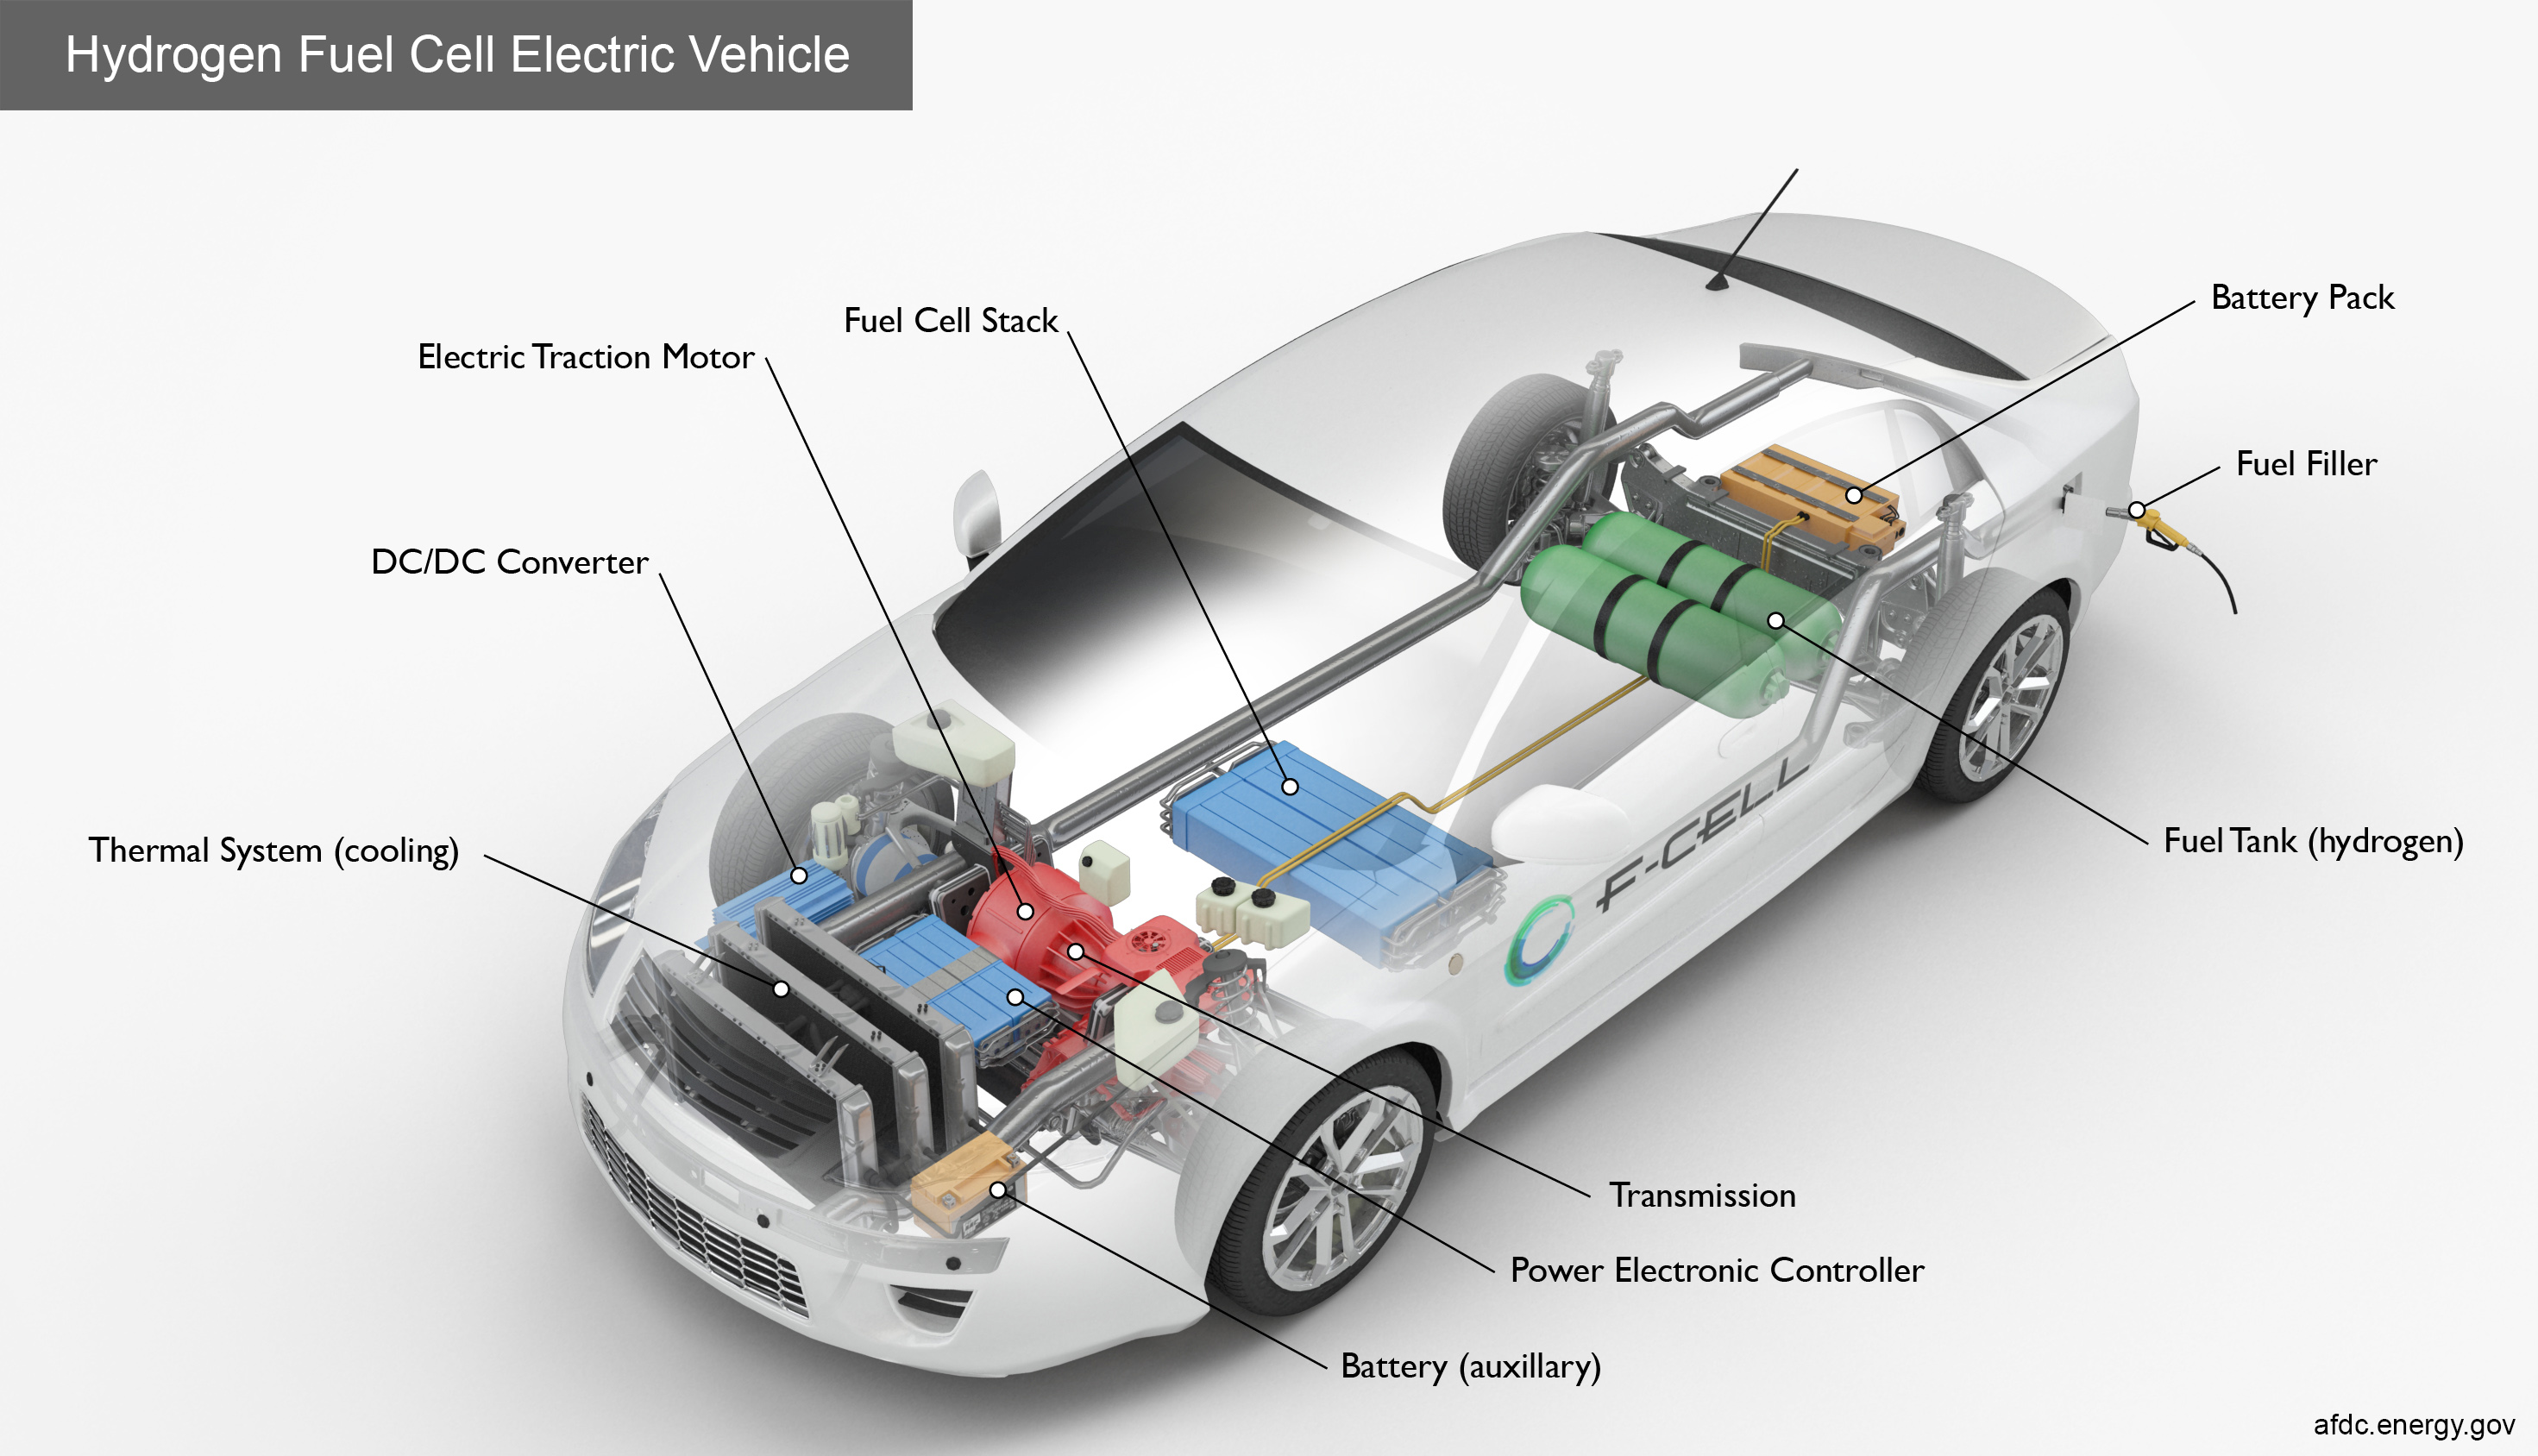 Do Fuel Cell Electric Vehicles have a spare tire?